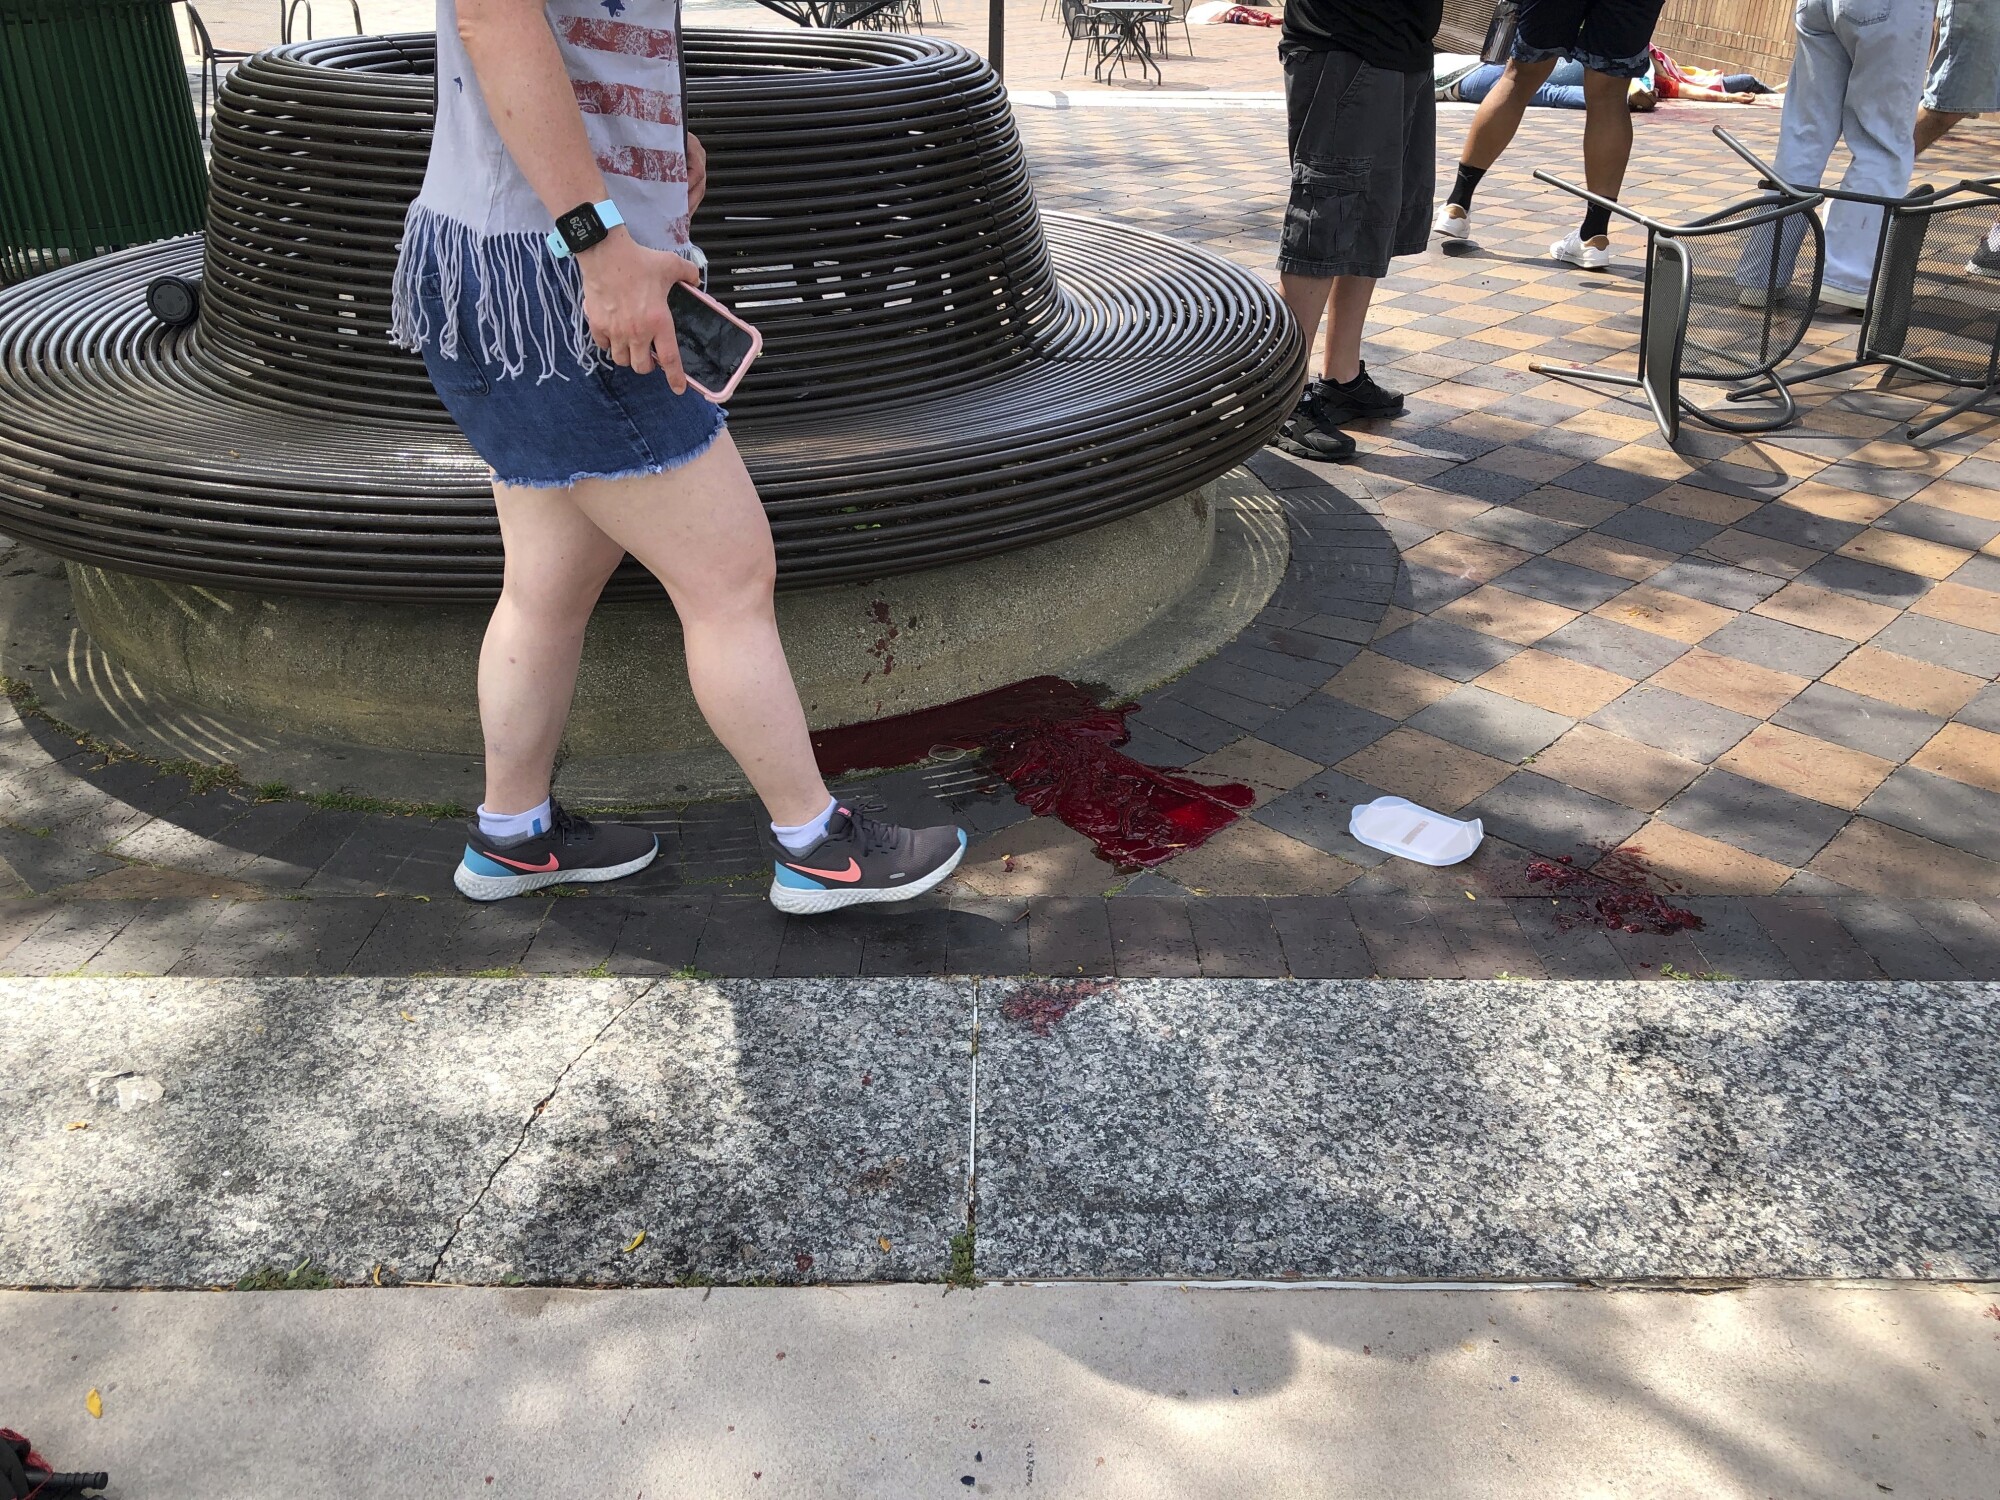 A man stands on the sidewalk next to a pool of blood.